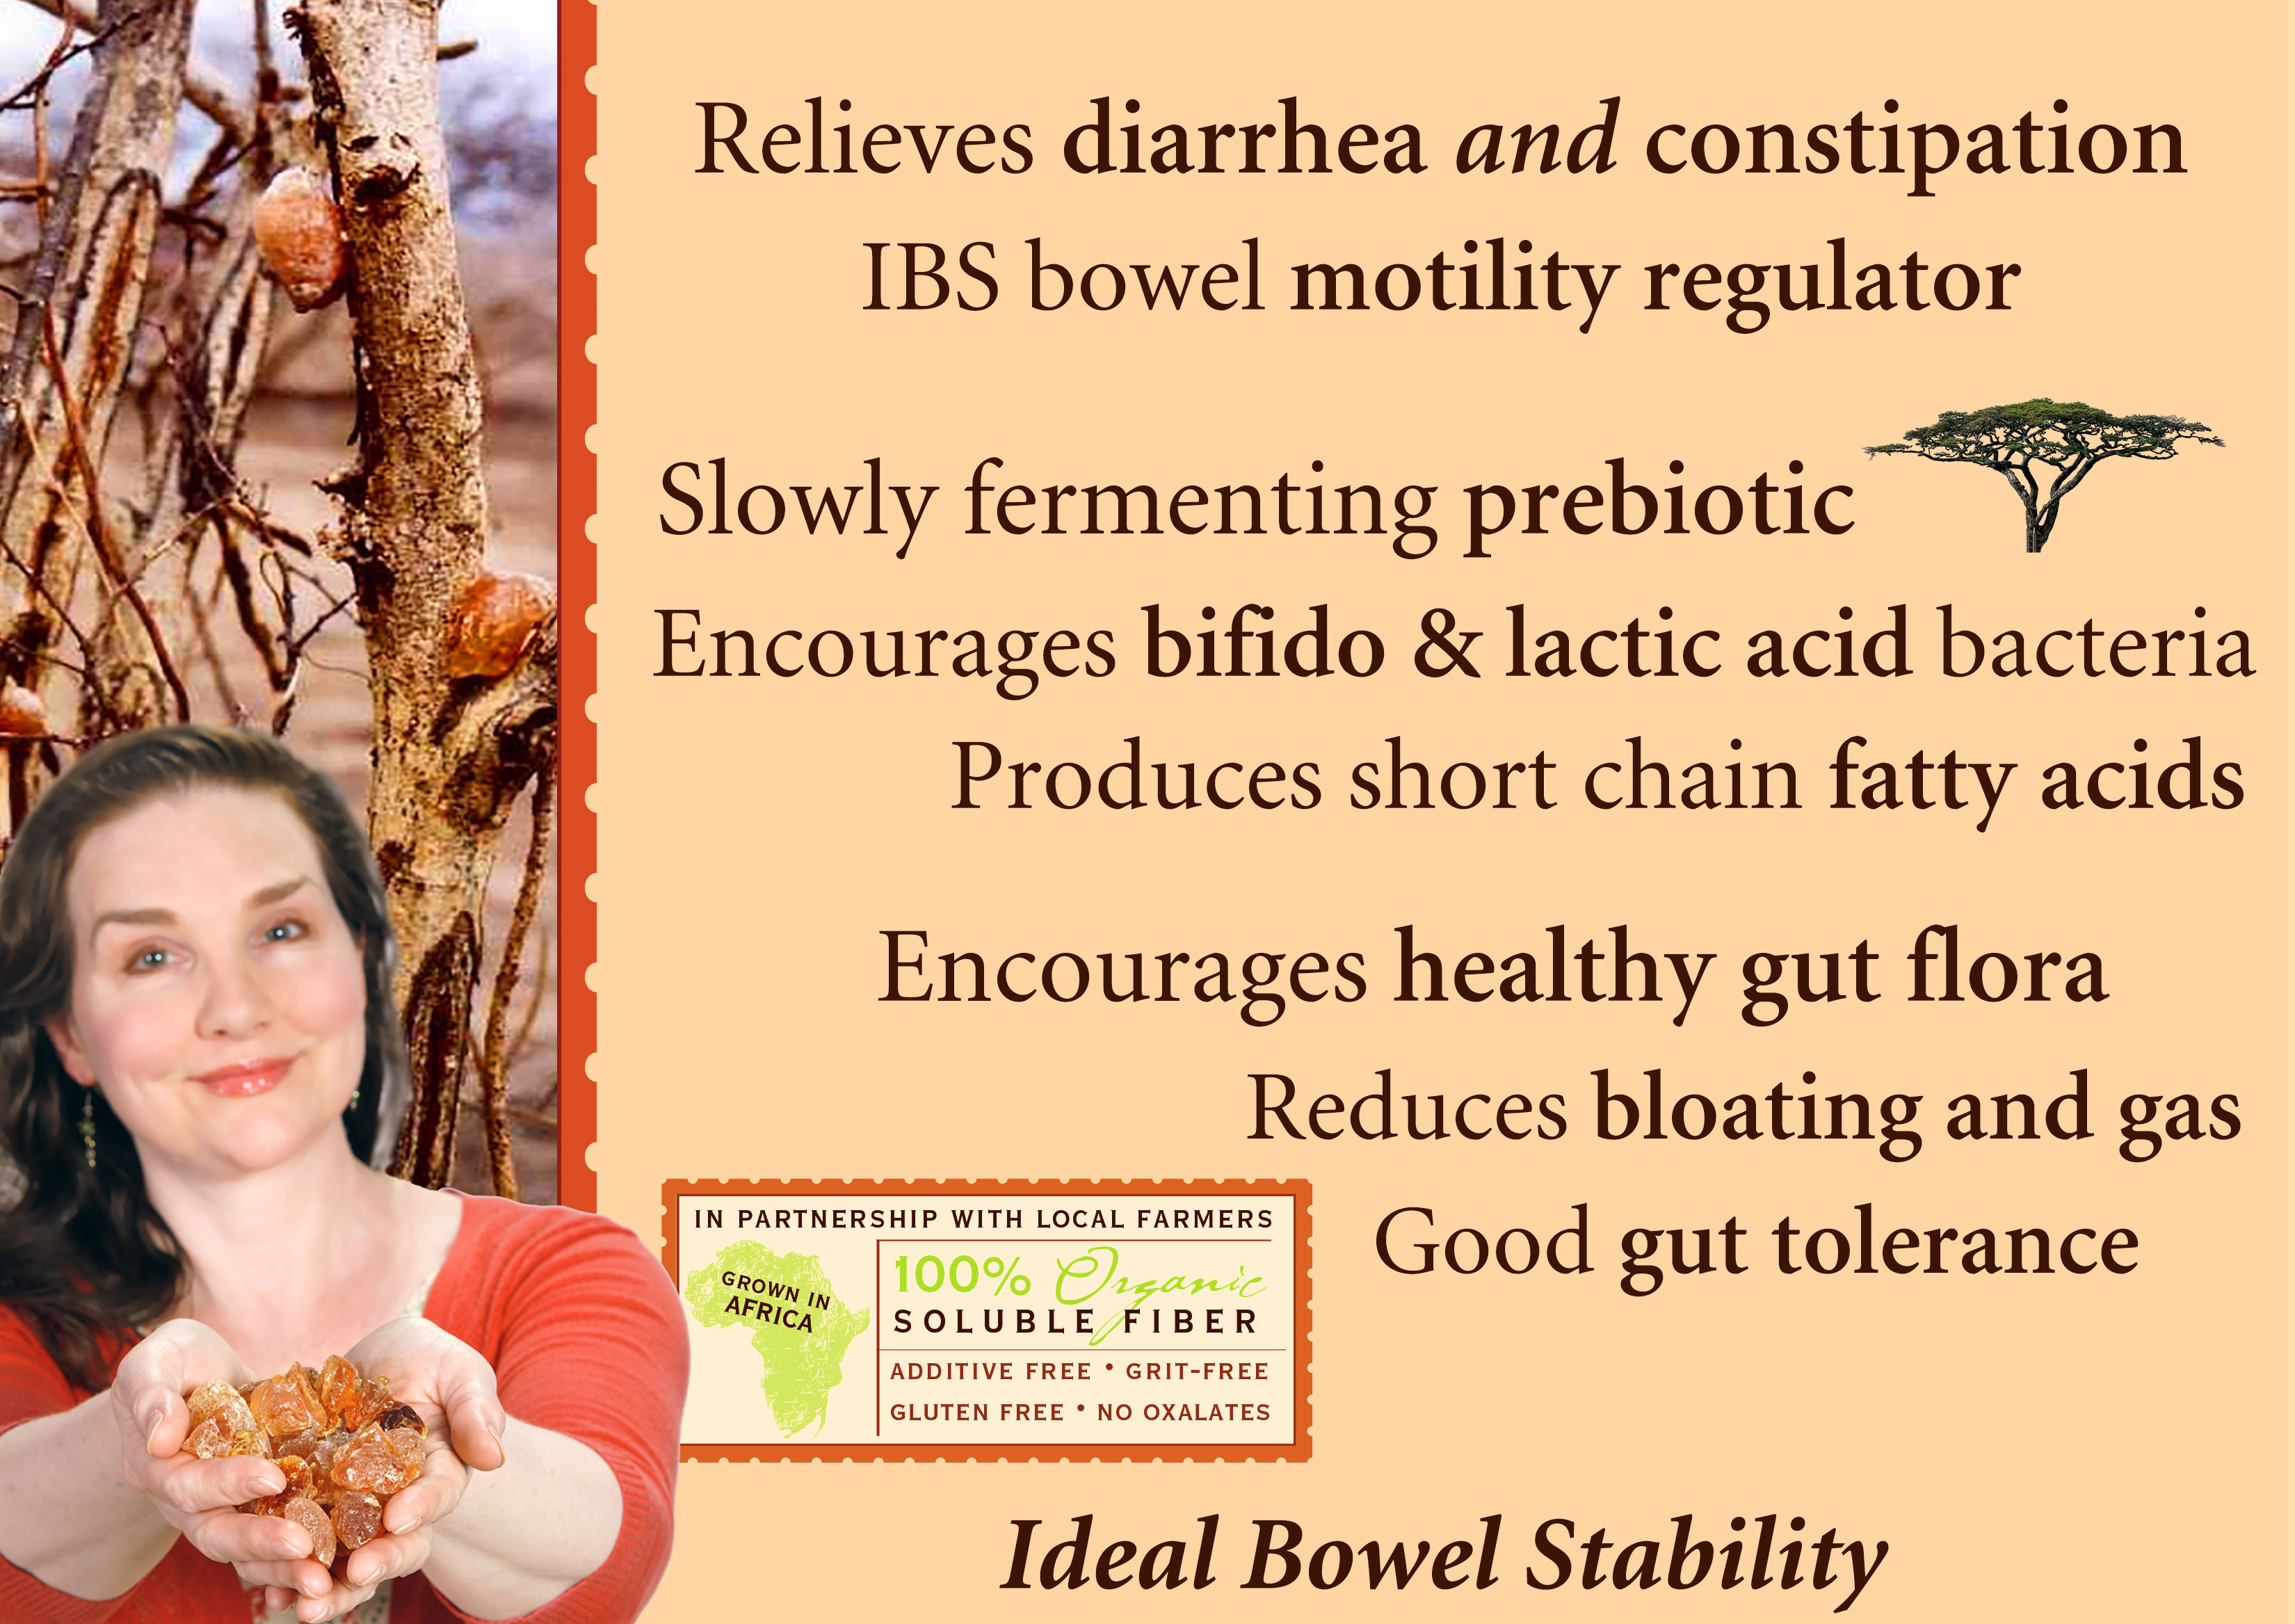 Belly Bloat Diet Kit: Eating for IBS, Fennel TEABAGS, Tummy Fiber Acacia Can